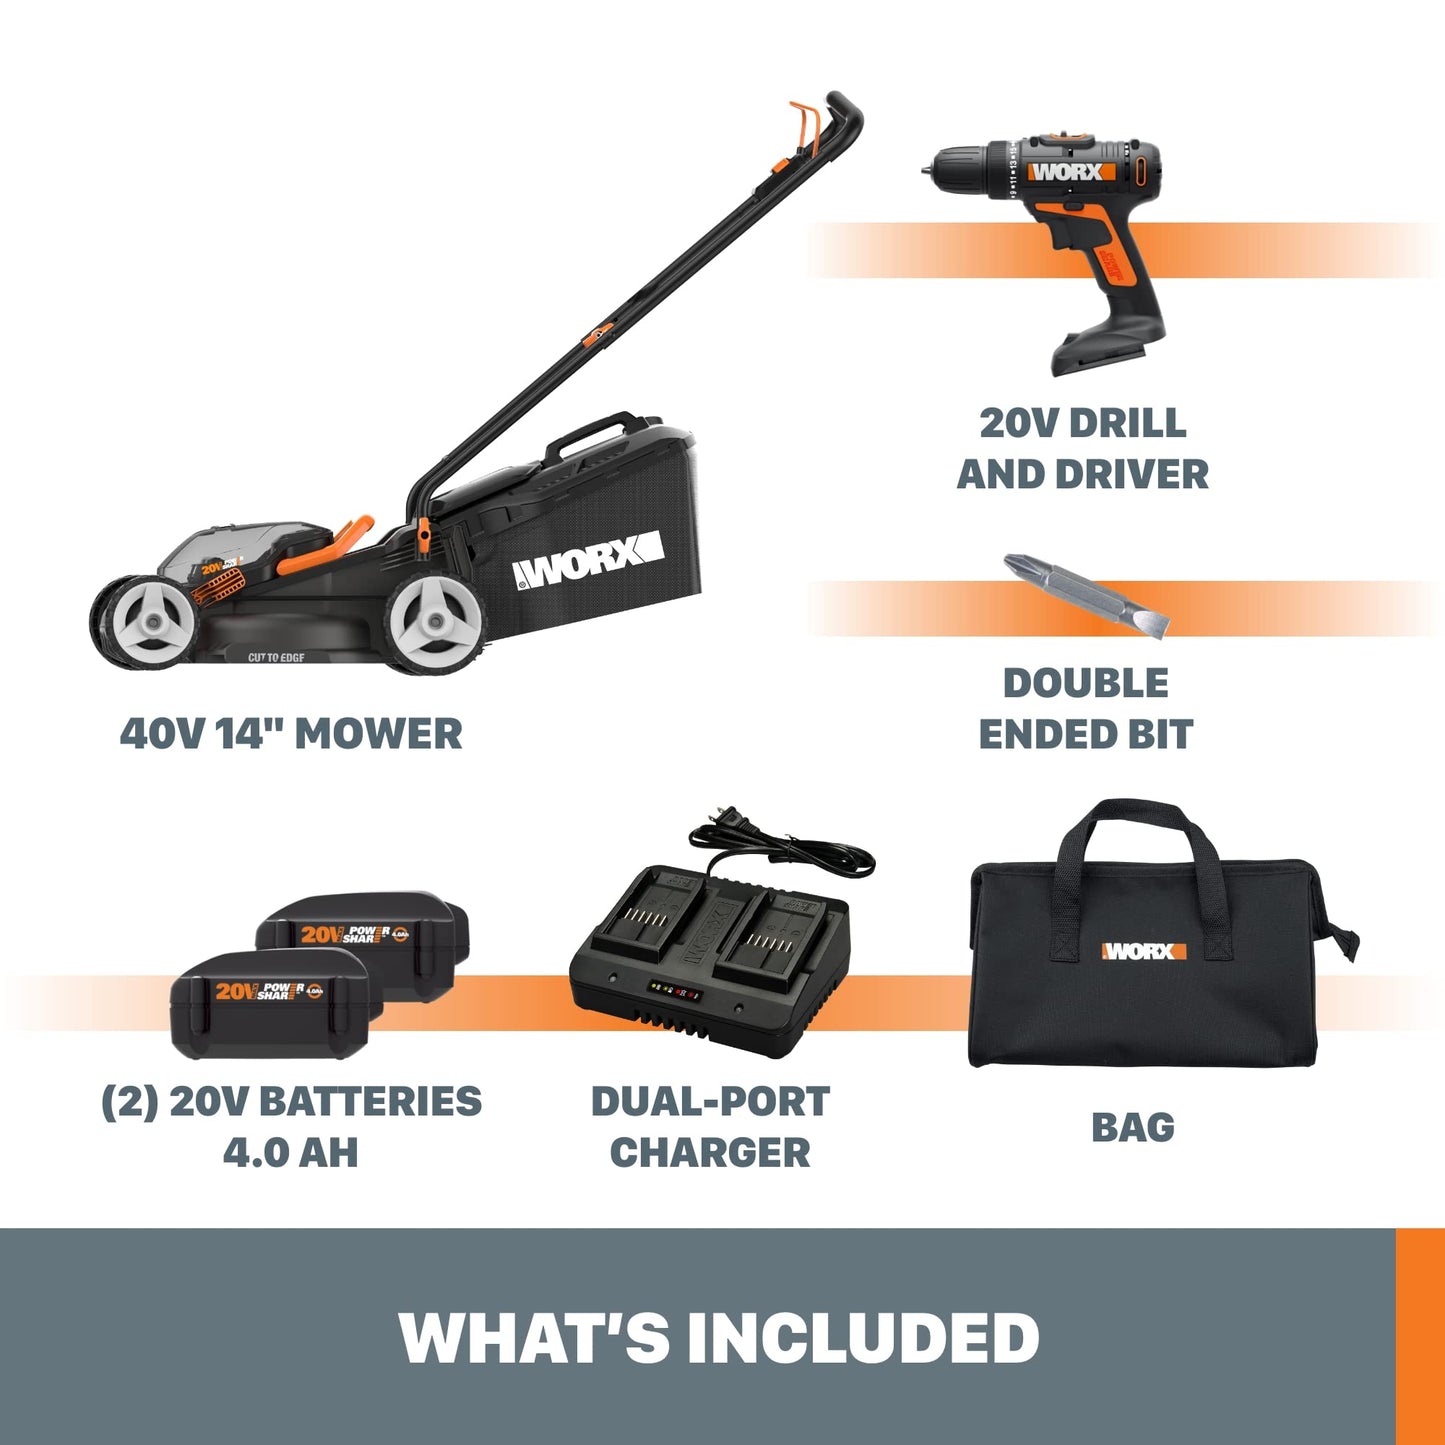 Worx 40V Power Share Yard & Tool Kit 14" 40-Volt 40.0Ah Batteries Included + Drill/Driver Mower + Drill/Driver